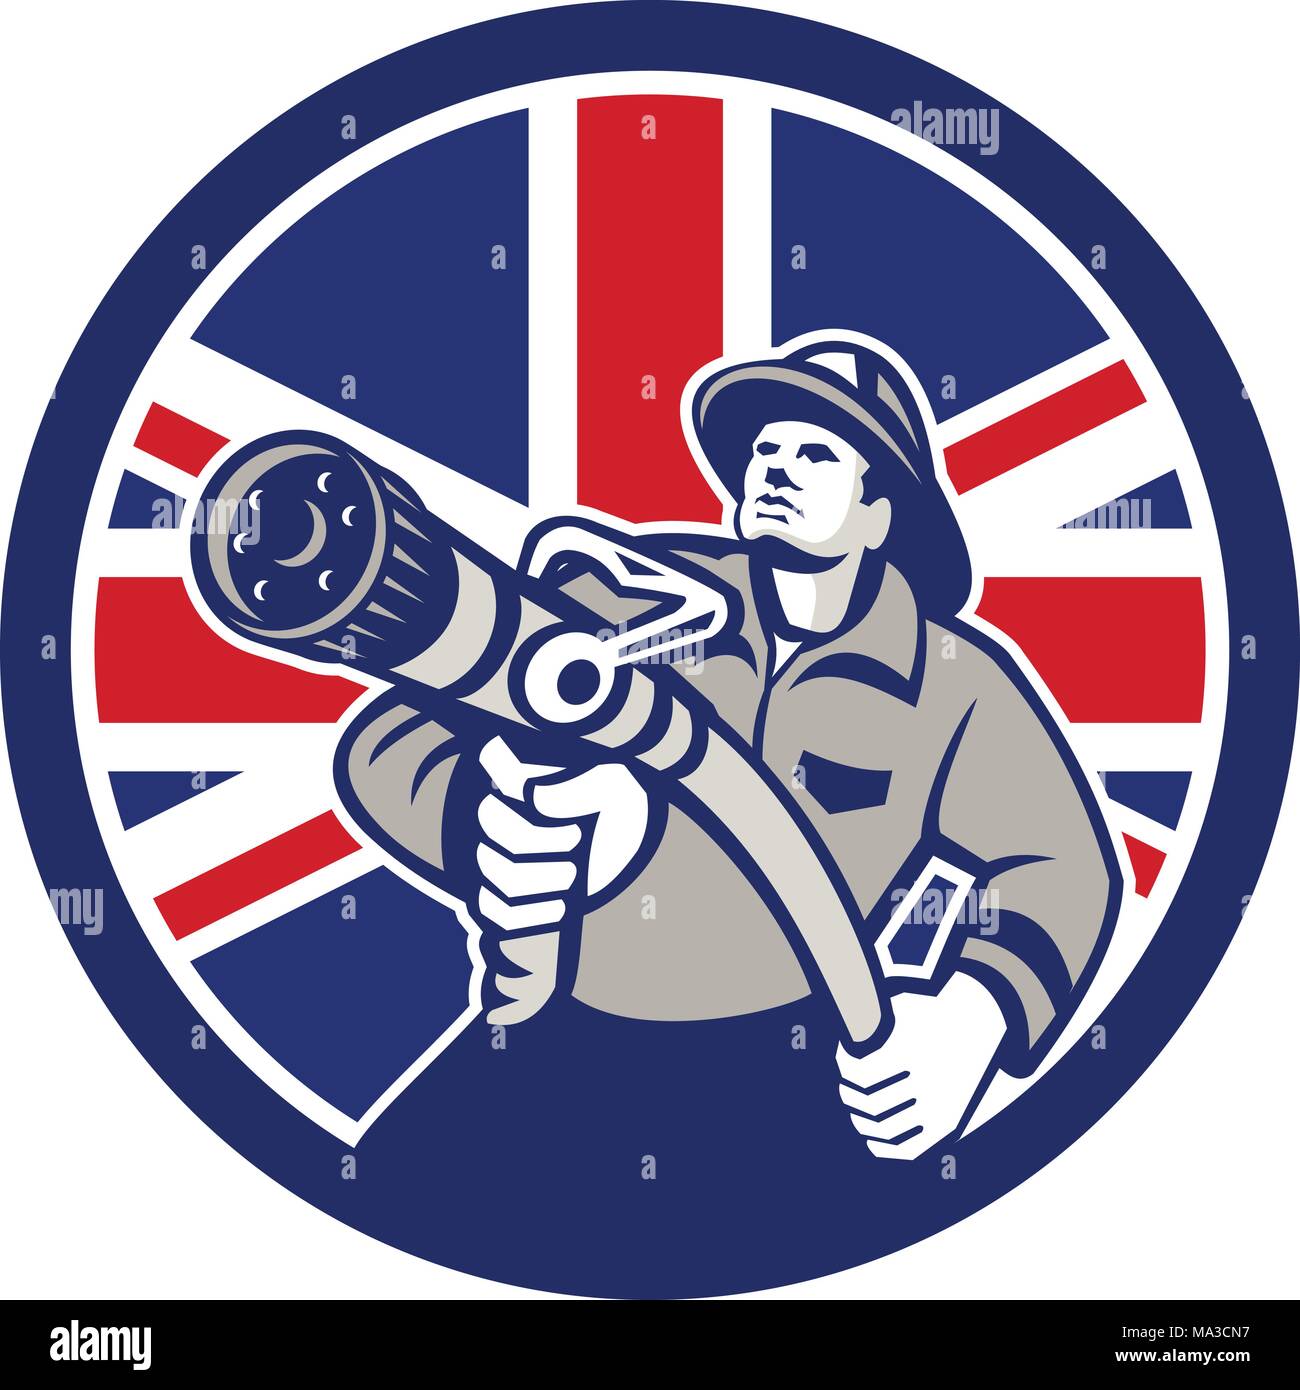 Icon retro style illustration of a British firefighter or fireman holding a fire hose front view  with United Kingdom UK, Great Britain Union Jack fla Stock Vector